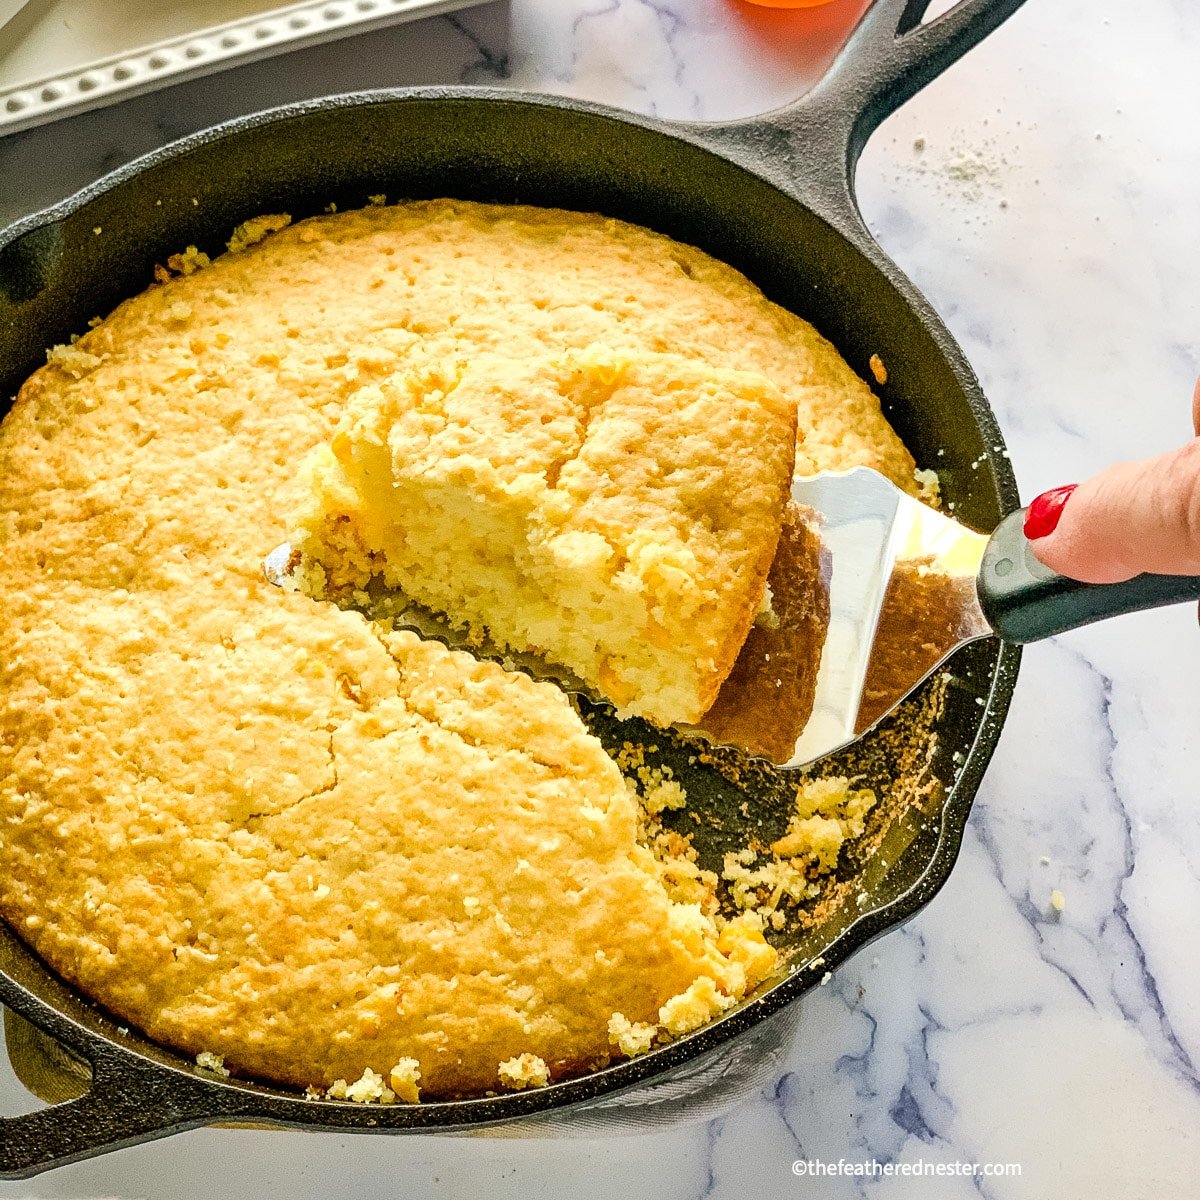 slice of Bisquick corn bread on a spatula above cast iron skillet.